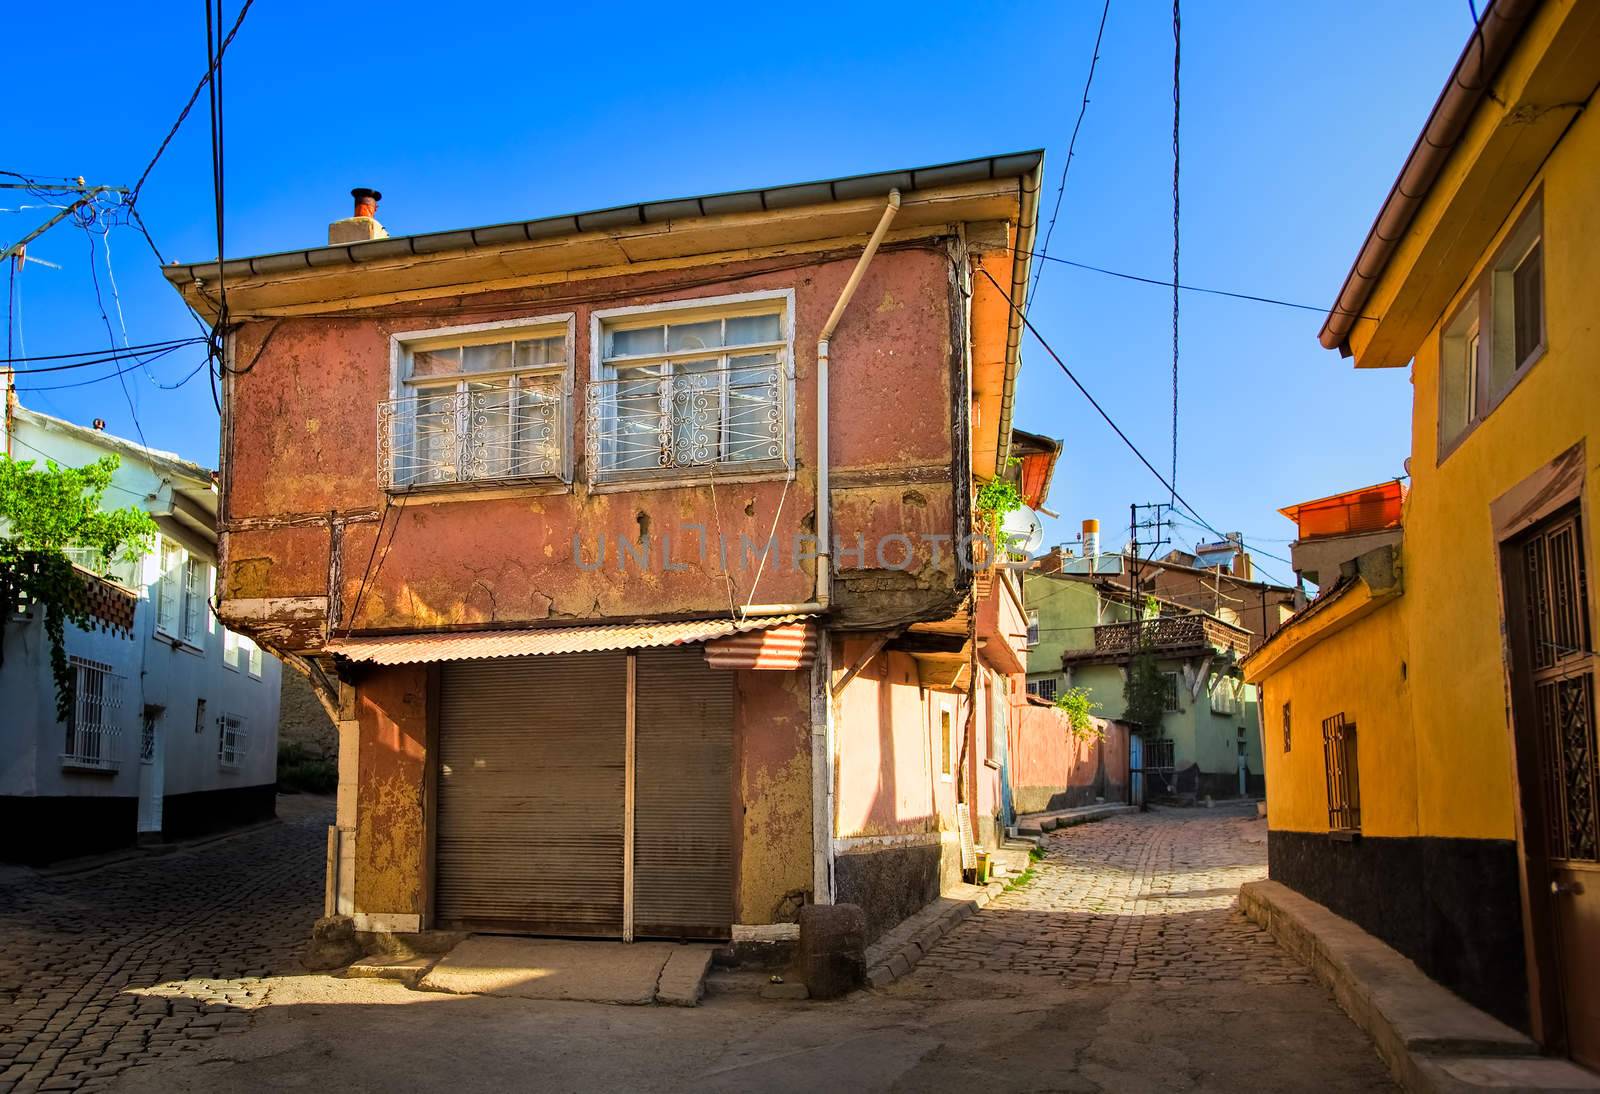 Old traditional ottoman house in Afyon, Turkey